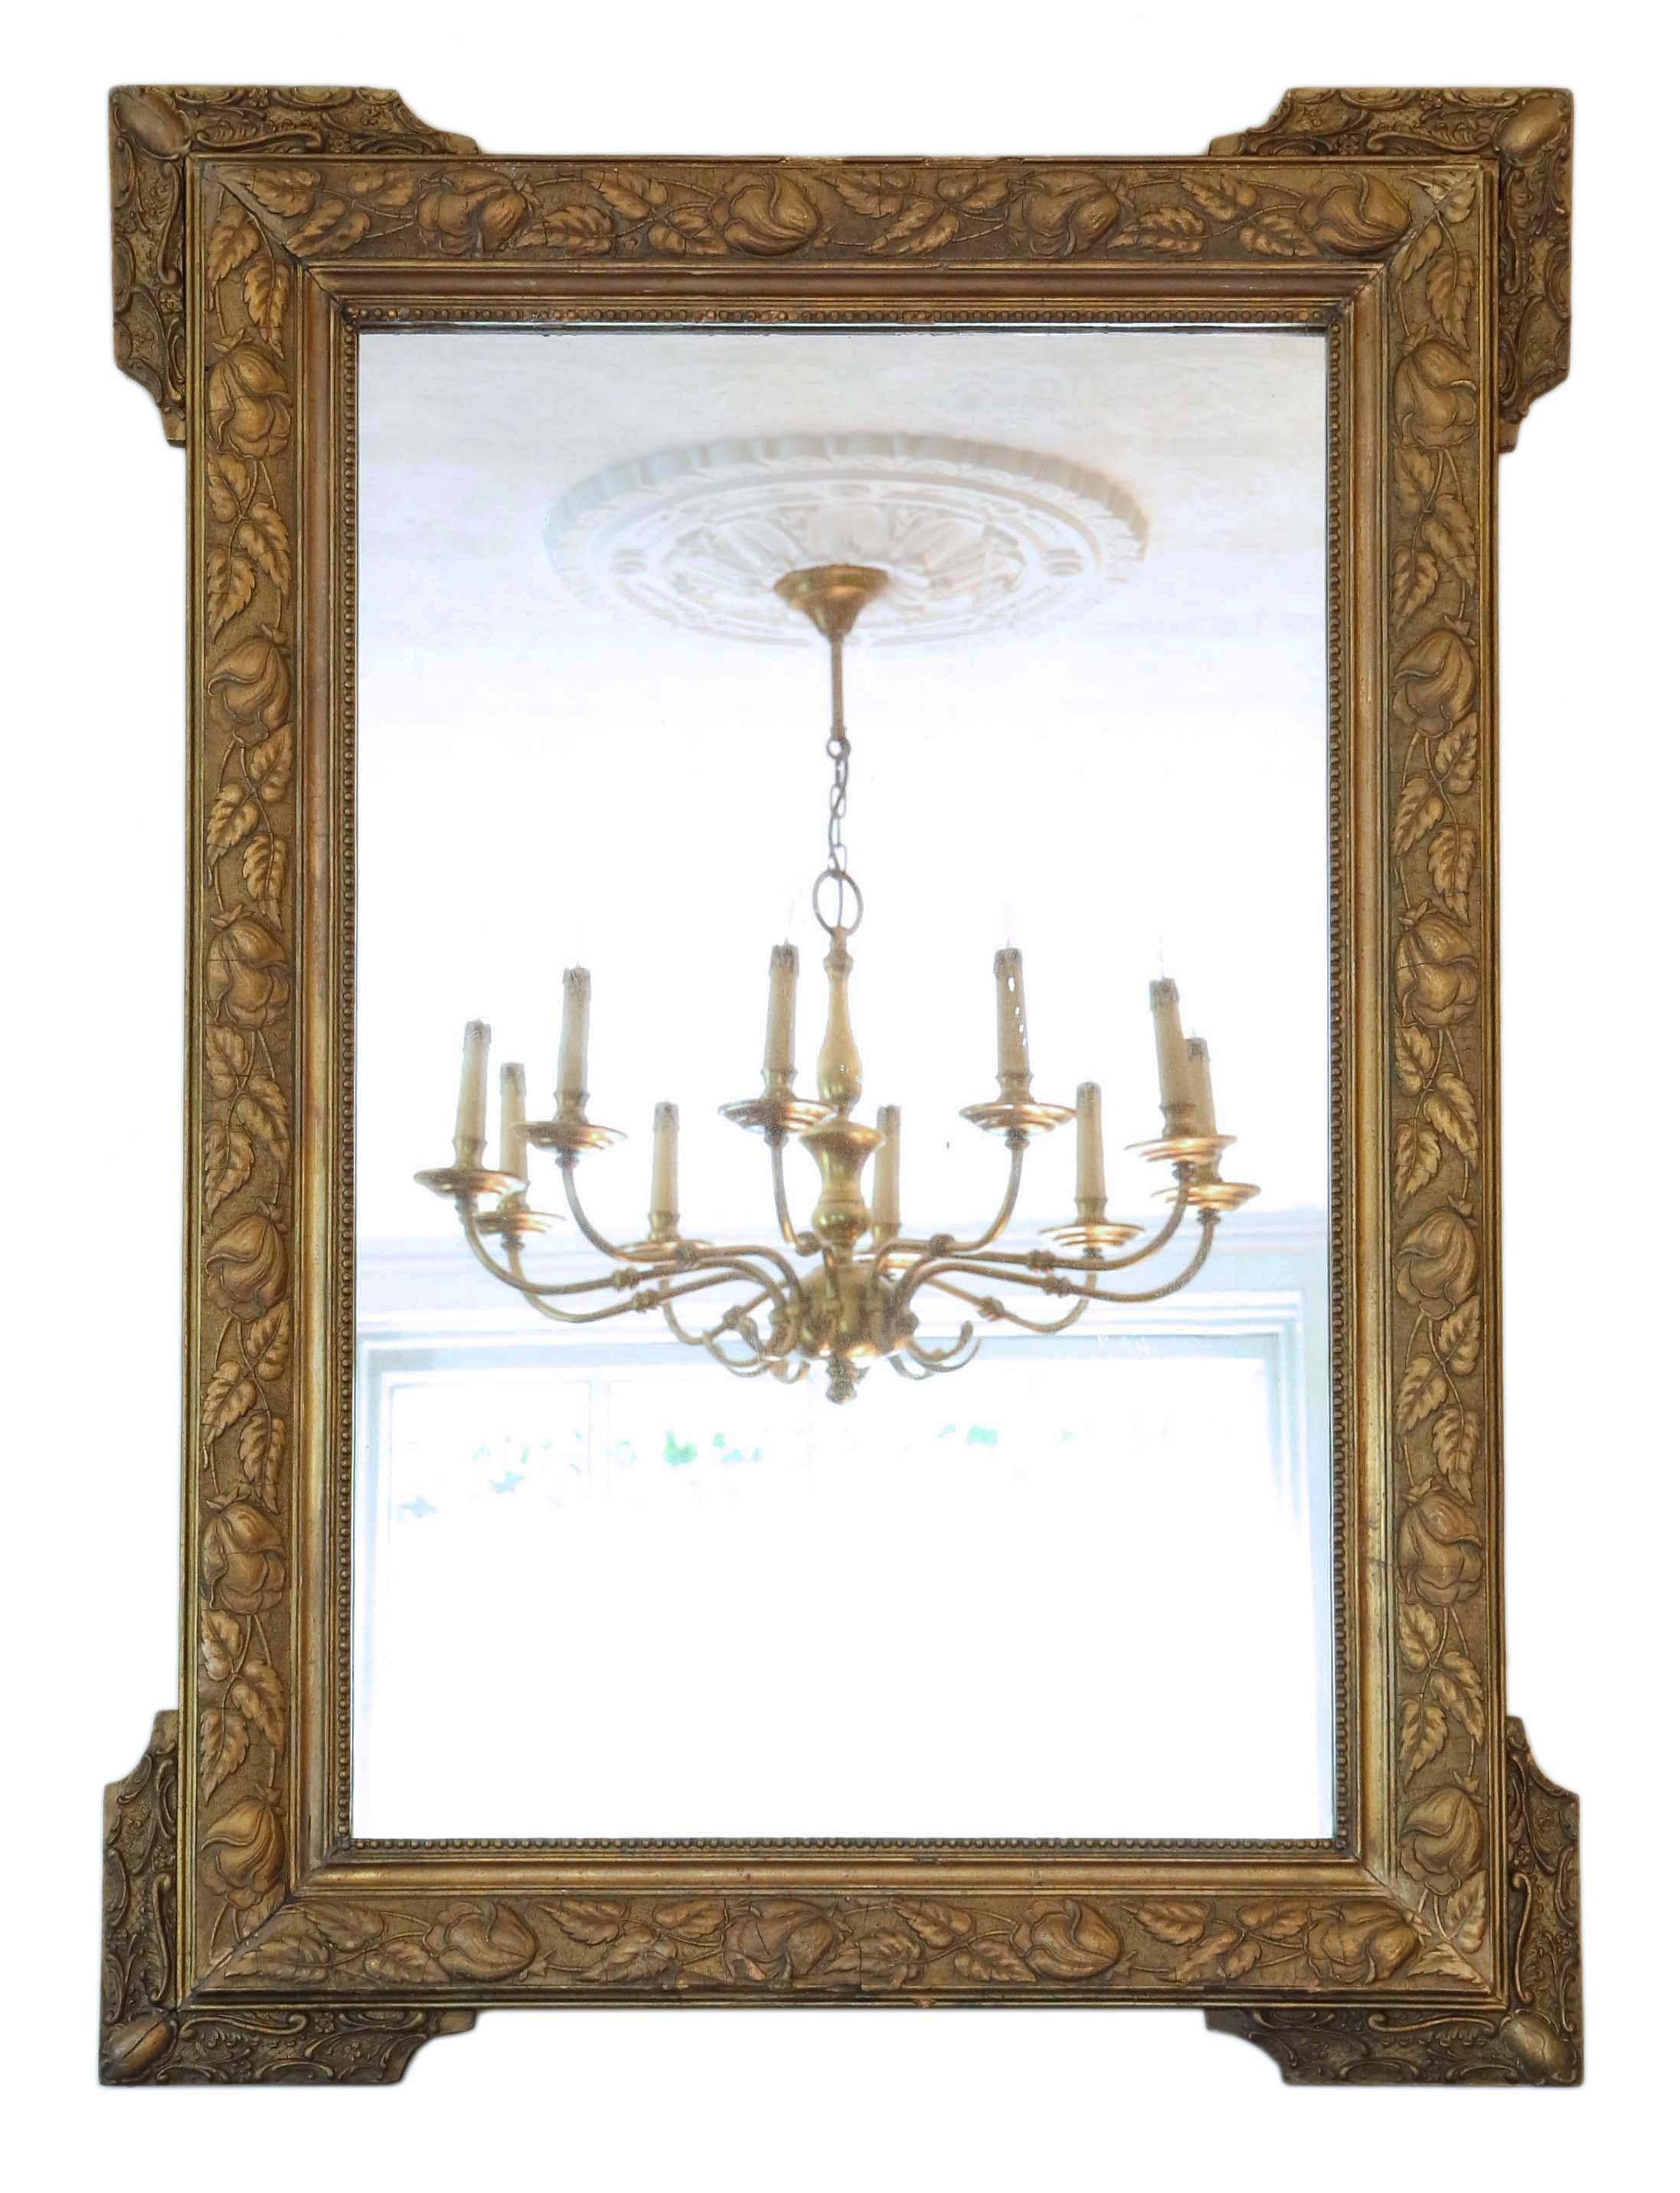 Antique large quality gilt wall mirror overmantle from the 19th Century. Could be hung in portrait or landscape.

An impressive find, that would look amazing in the right location. No loose joints.

Original mirrored glass with light oxidation,